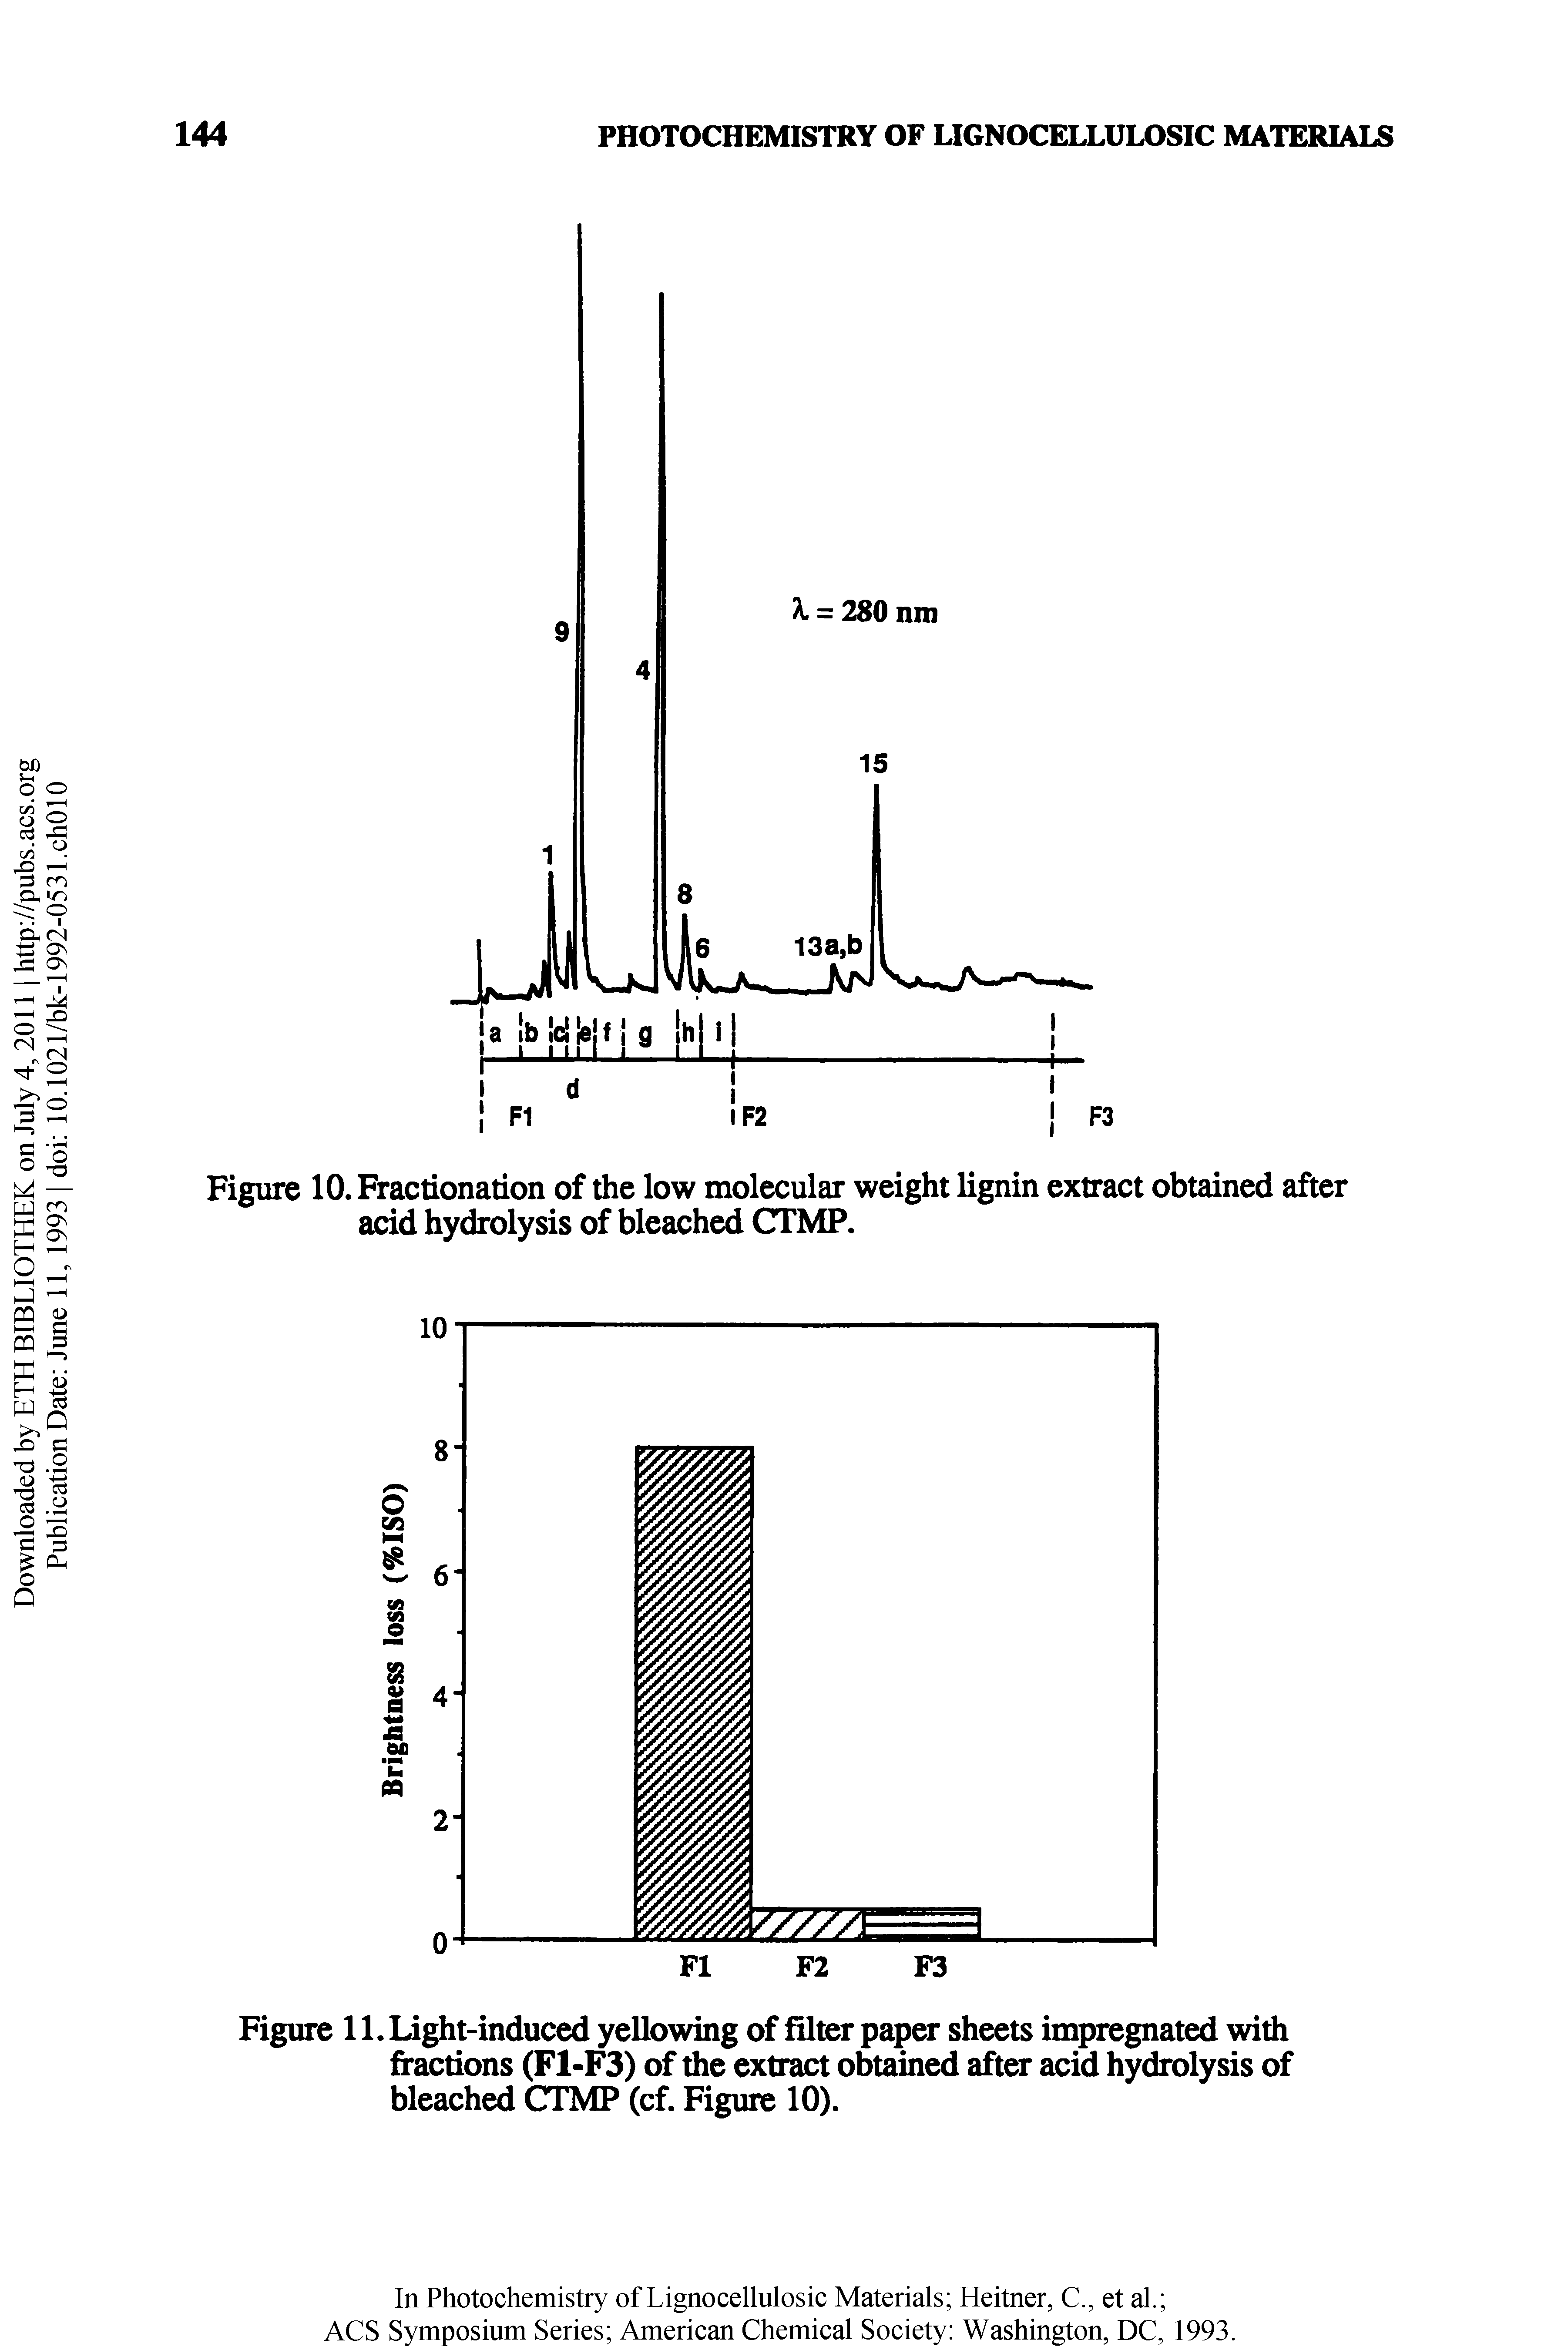 Figure 10. Fractionation of the low molecular weight lignin extract obtained after acid hydrolysis of bleached CTMP.